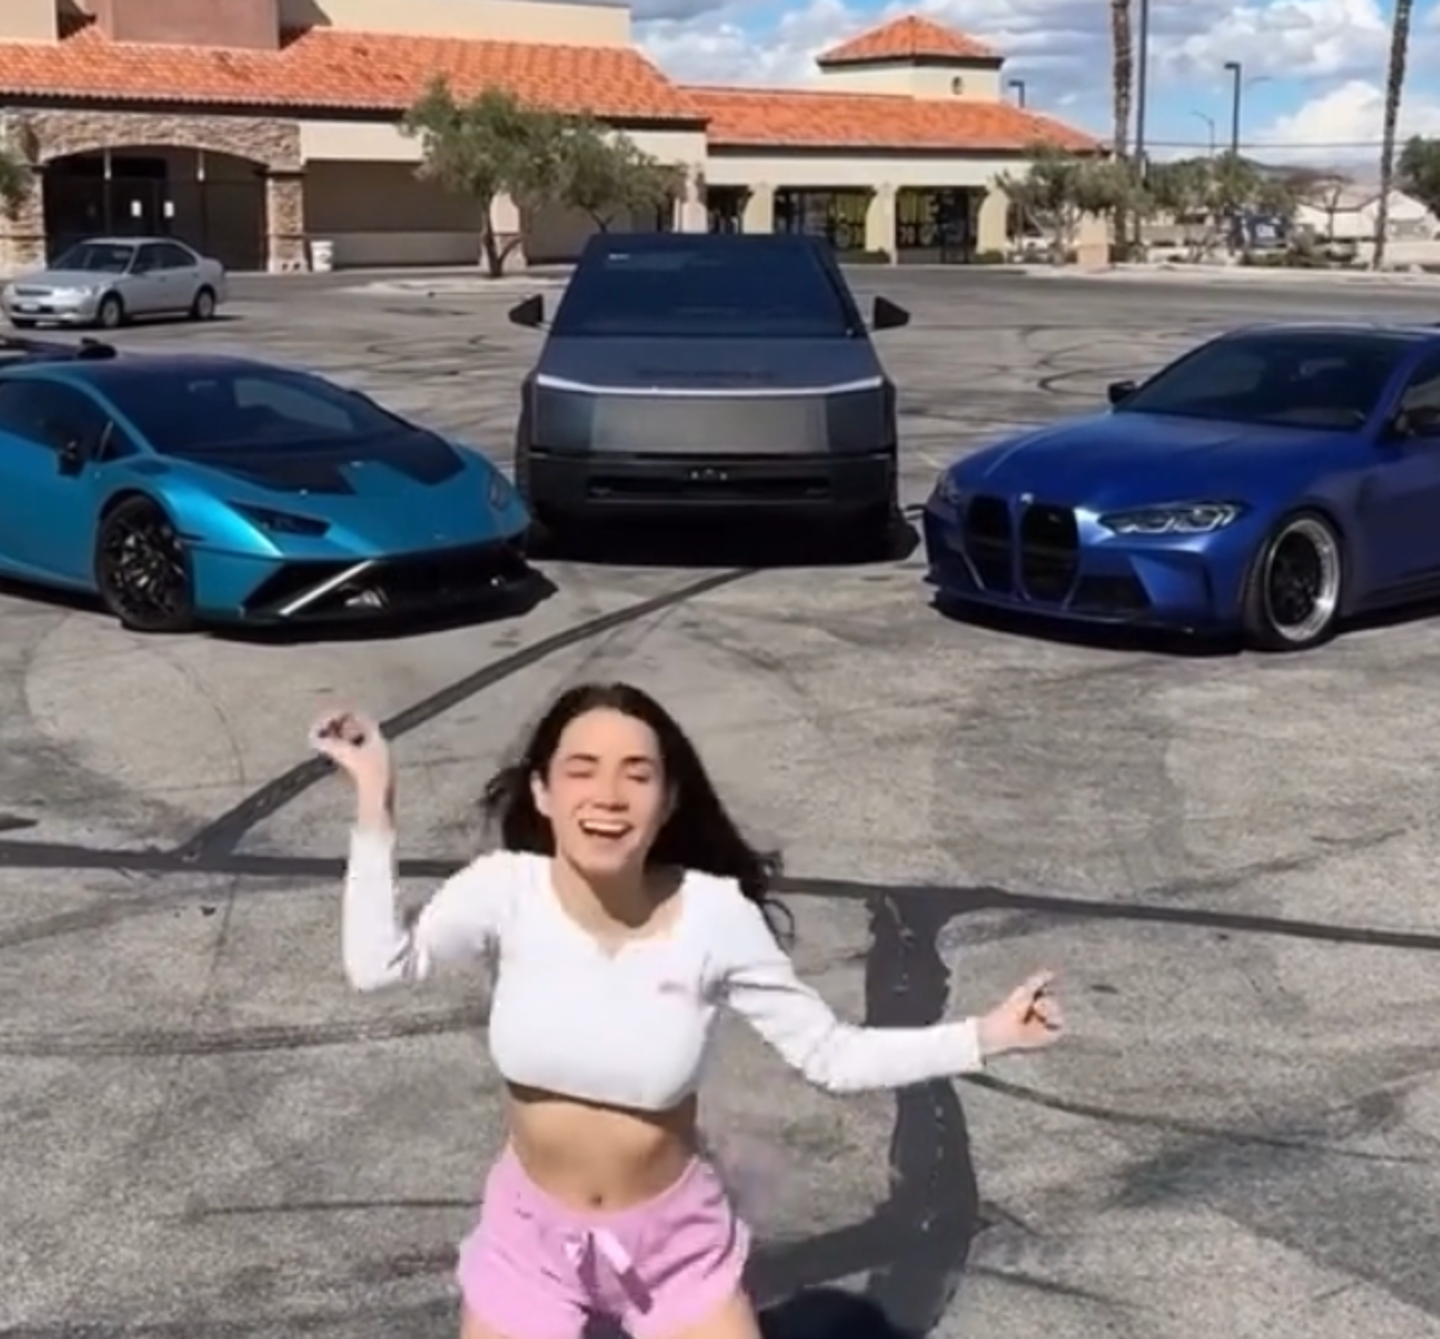 Woman Breaks Lamborghini Window While Dancing For TikTok, Surprising Viewers With Car's Fragility